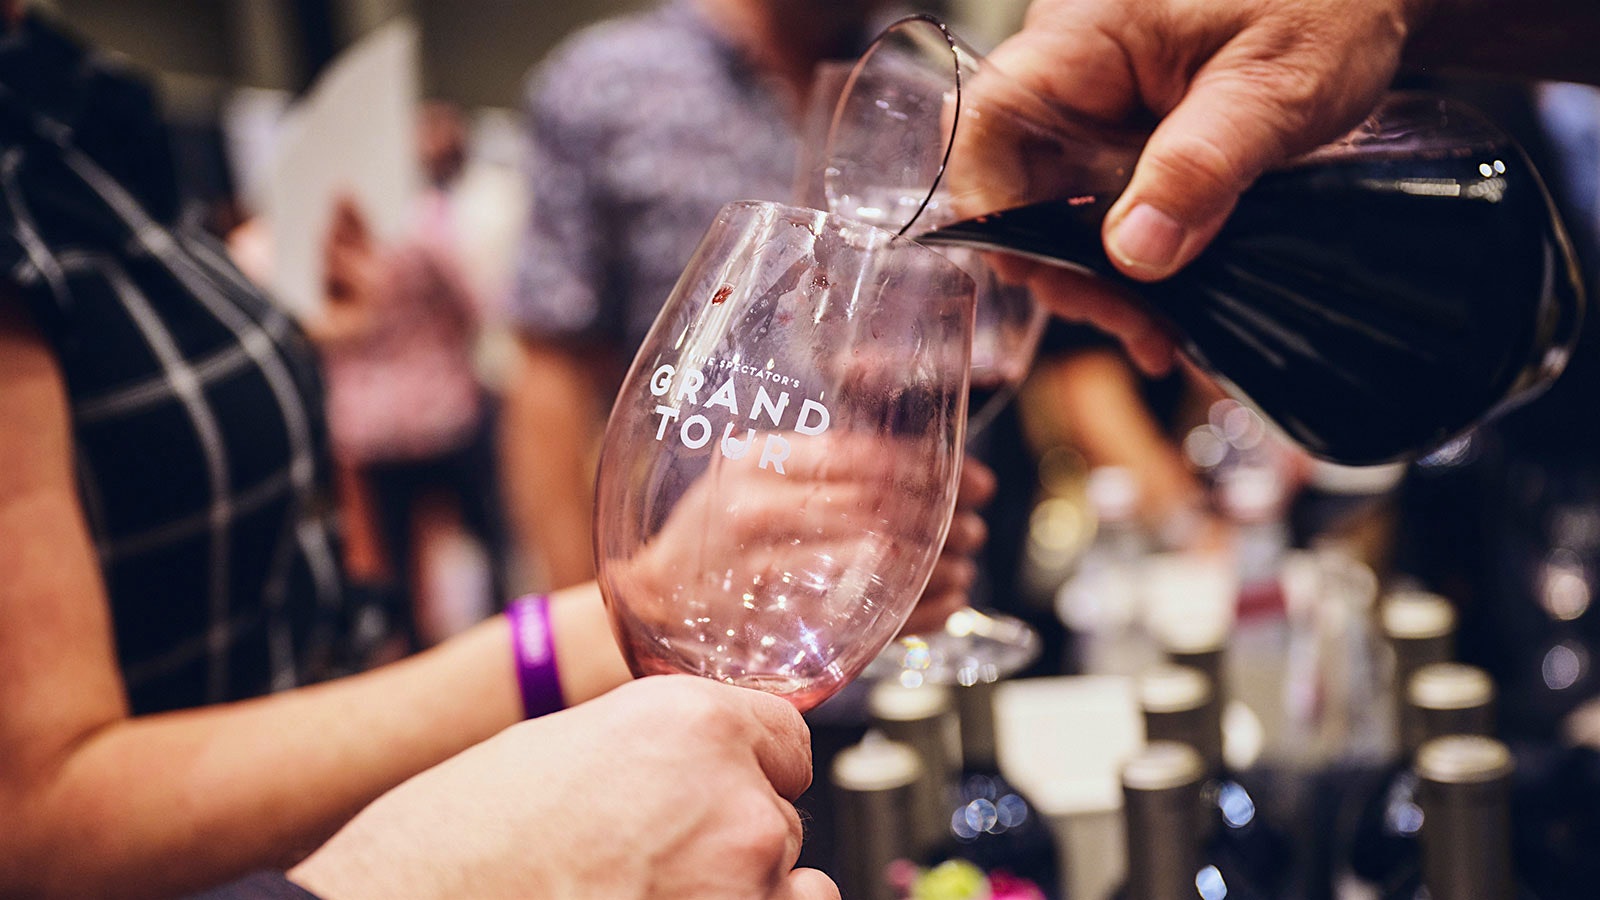  A winemaker pours a red wine at the Wine Spectator Grand Tour in New Orleans.